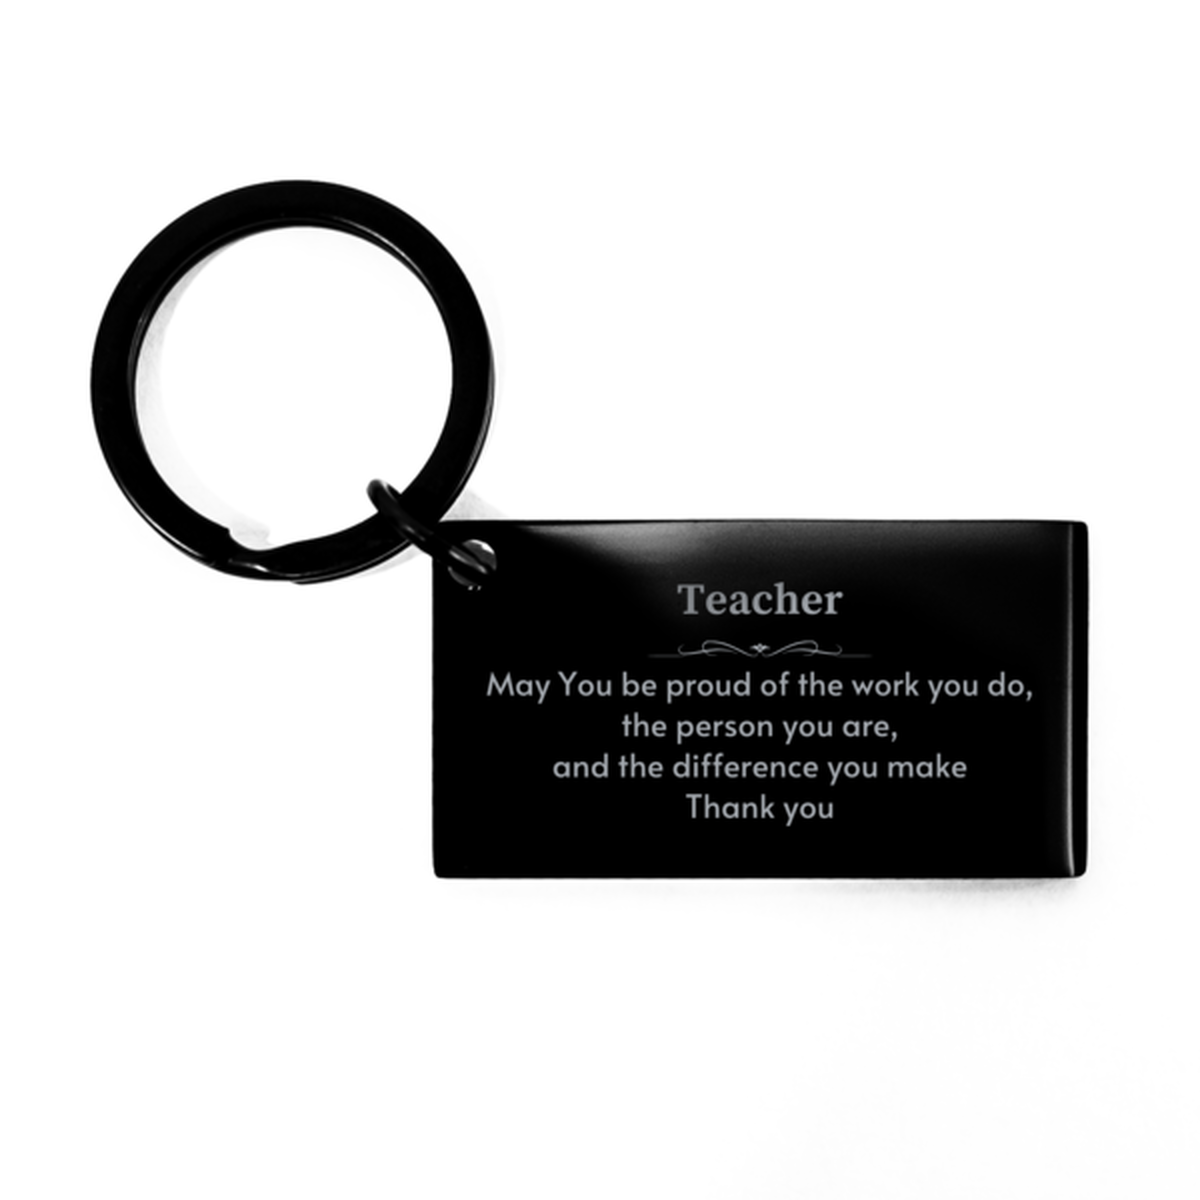 Heartwarming Keychain Retirement Coworkers Gifts for Teacher, Word Processor May You be proud of the work you do, the person you are Gifts for Boss Men Women Friends